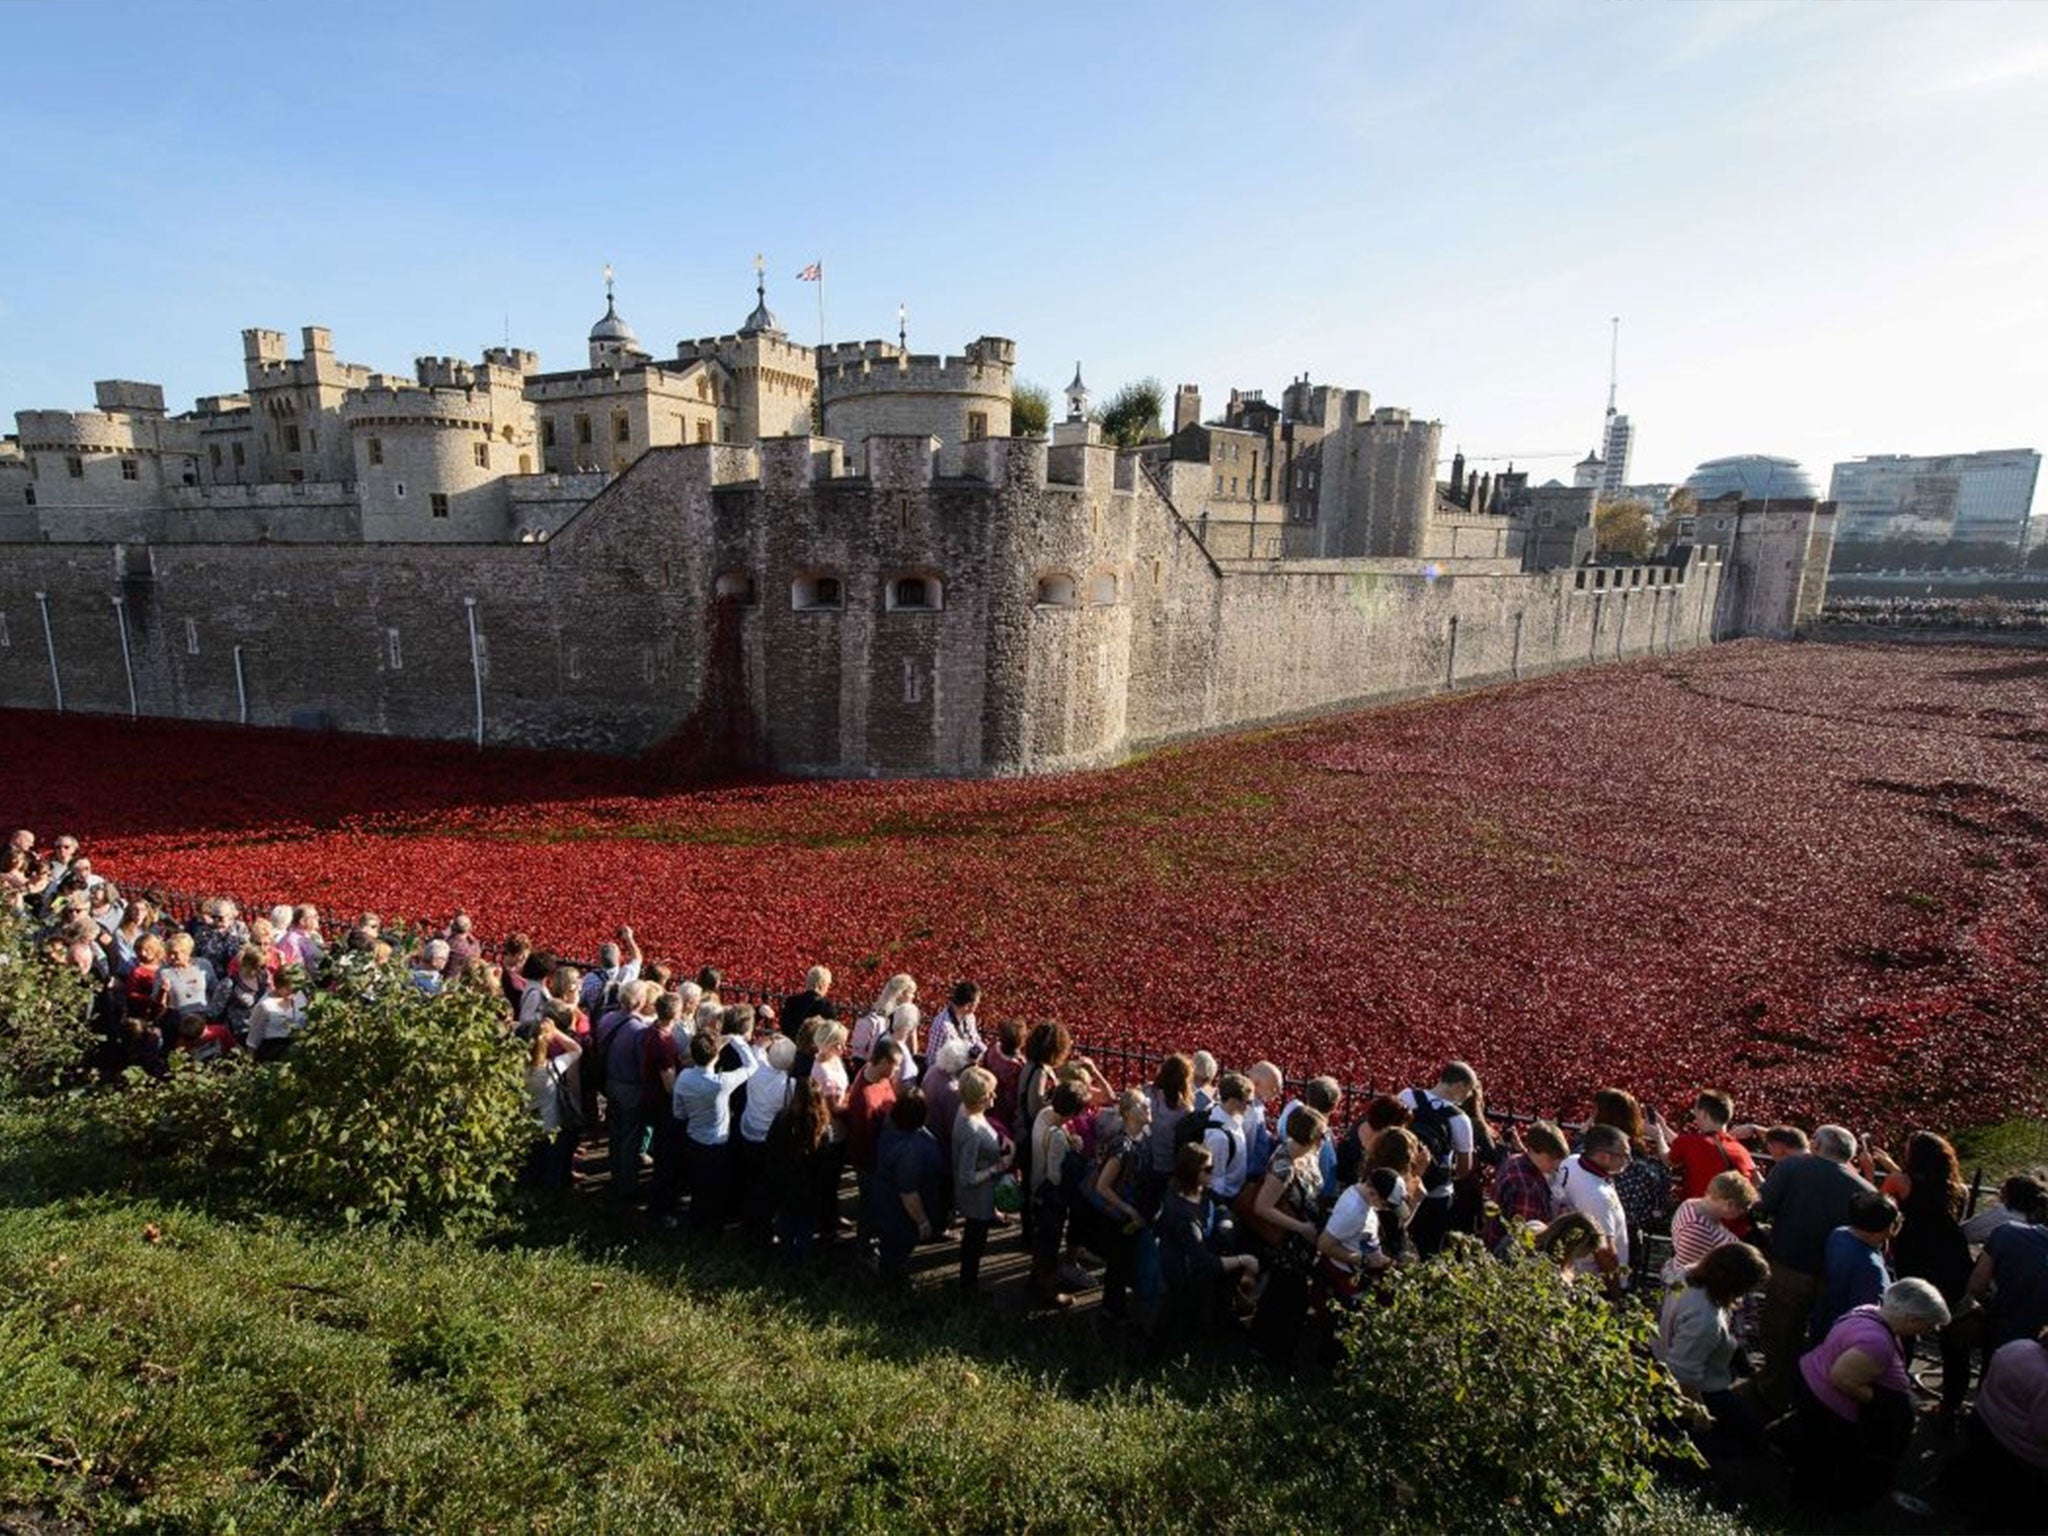 Visitors view the "Blood Swept Lands and Seas of Red" installation by ceramic artist Paul Cummins and theatre stage designer Tom Piper, marking the centenary of the outbreak of the First World War, in the moat area of the Tower of London in central London